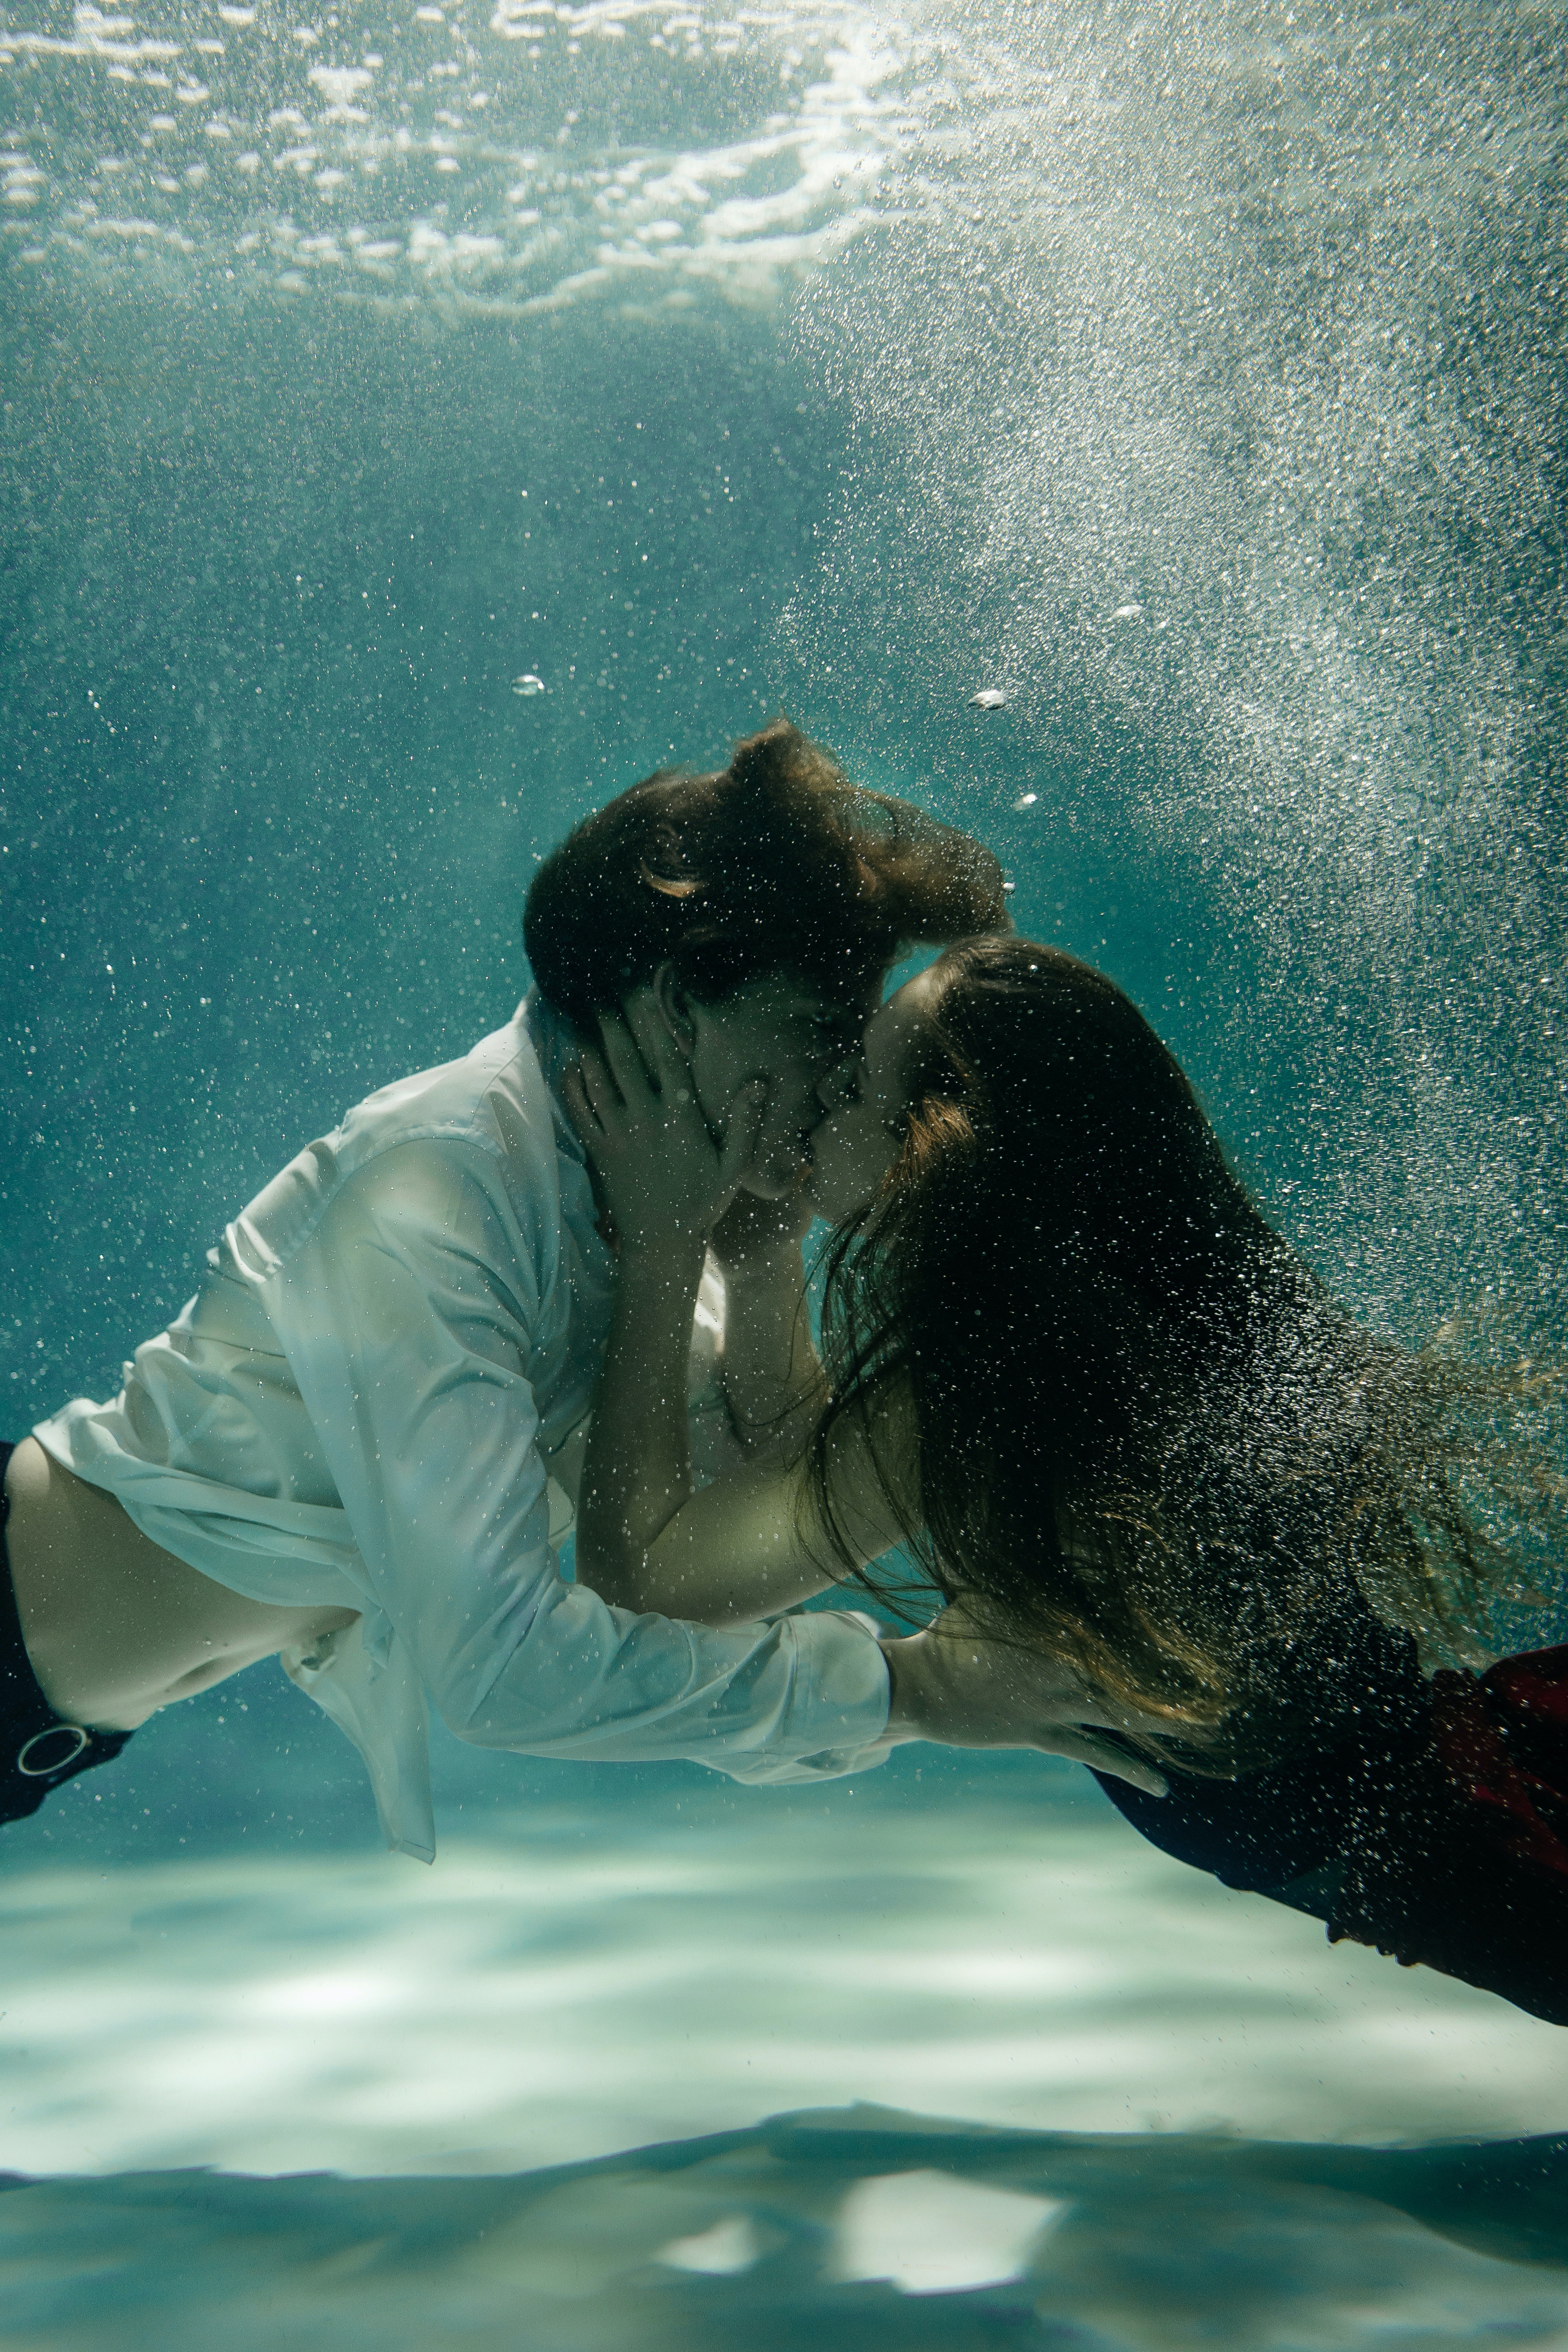 A couple kissing underwater. | Source: Pexels